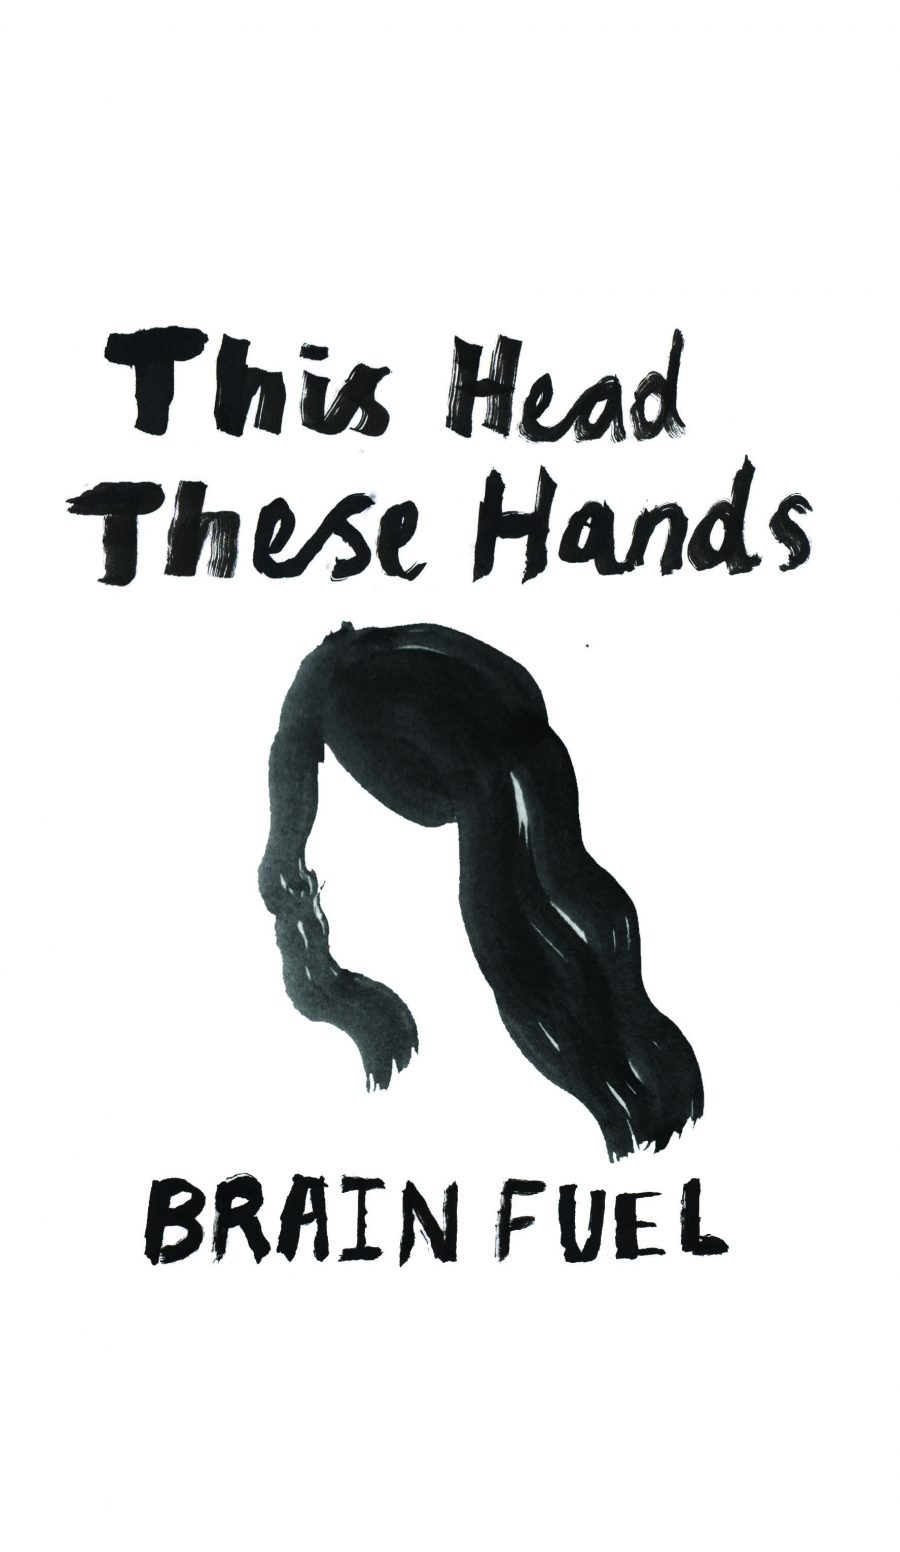 'this head, these hands. Brain Fuel' painting in black on a white background. A persons head with long hair.